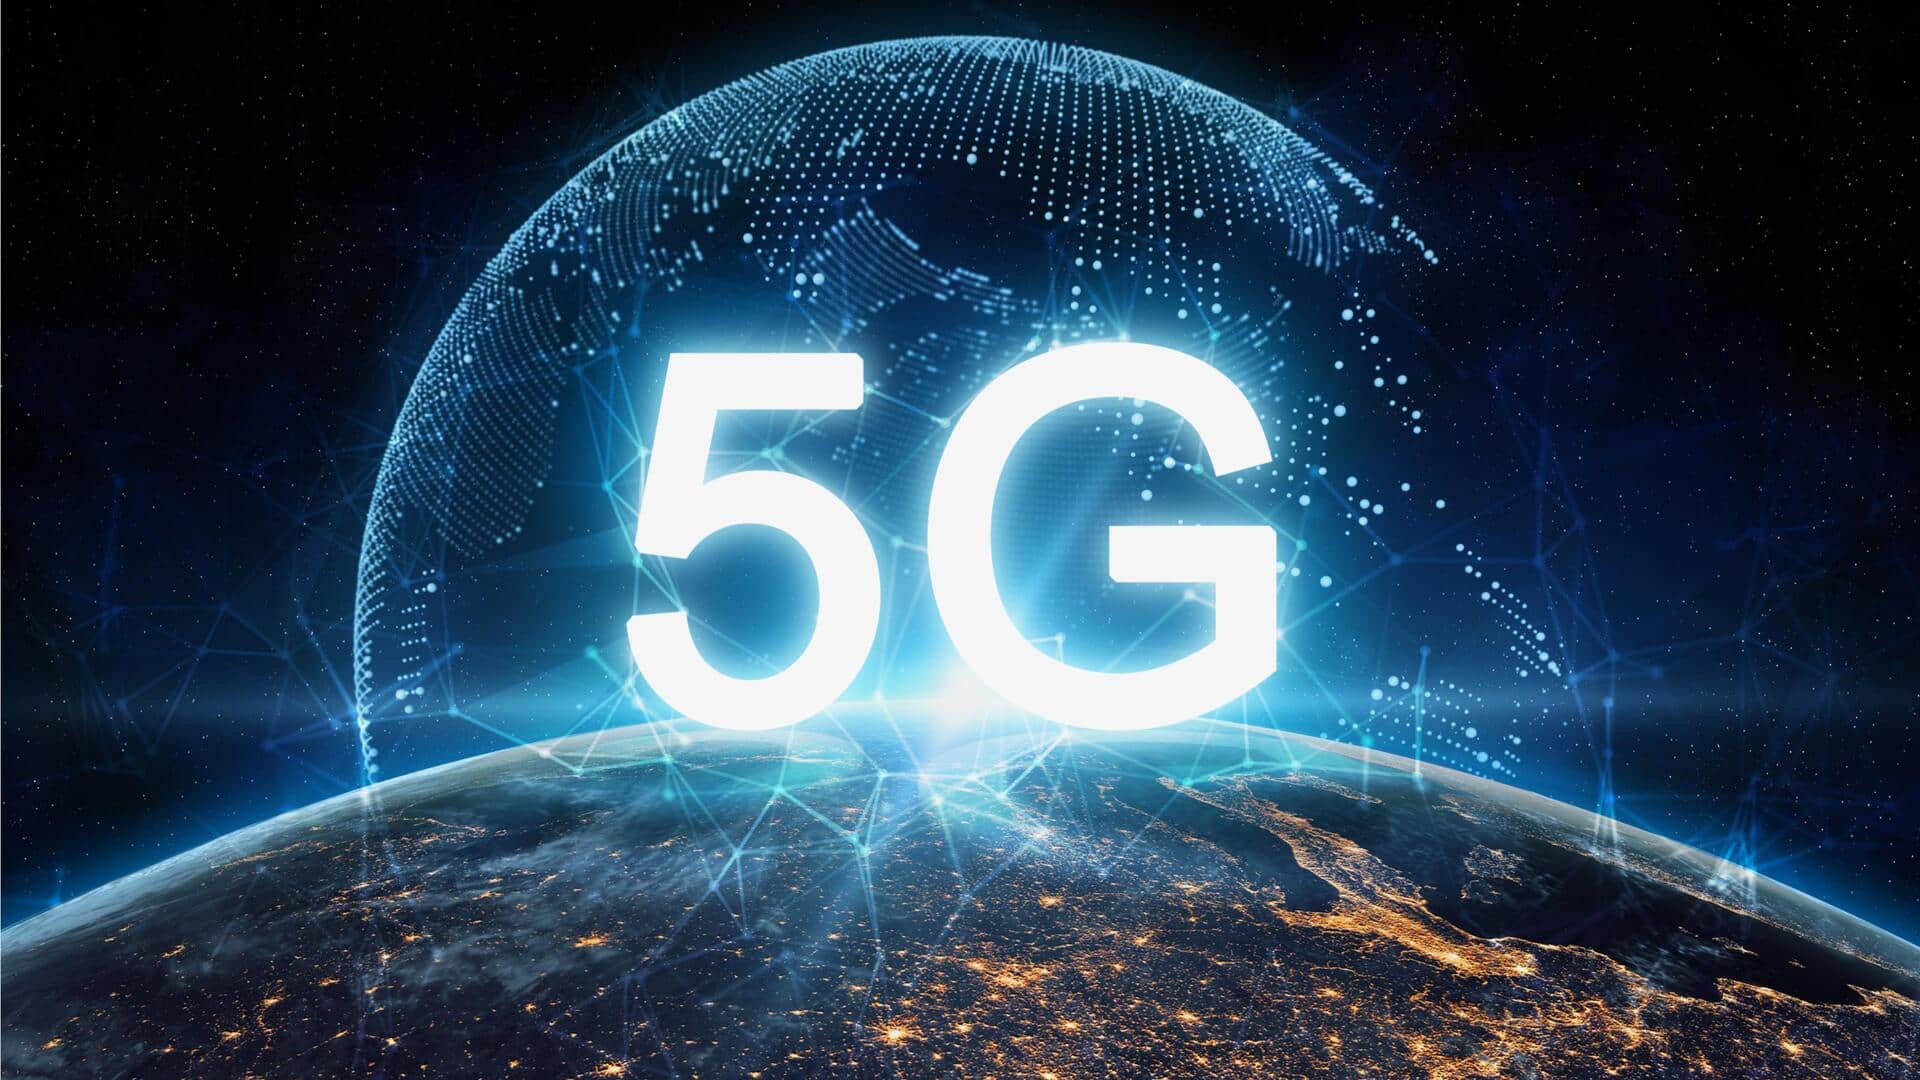 India's 5G milestone: 3 lakh sites covered in 10 months